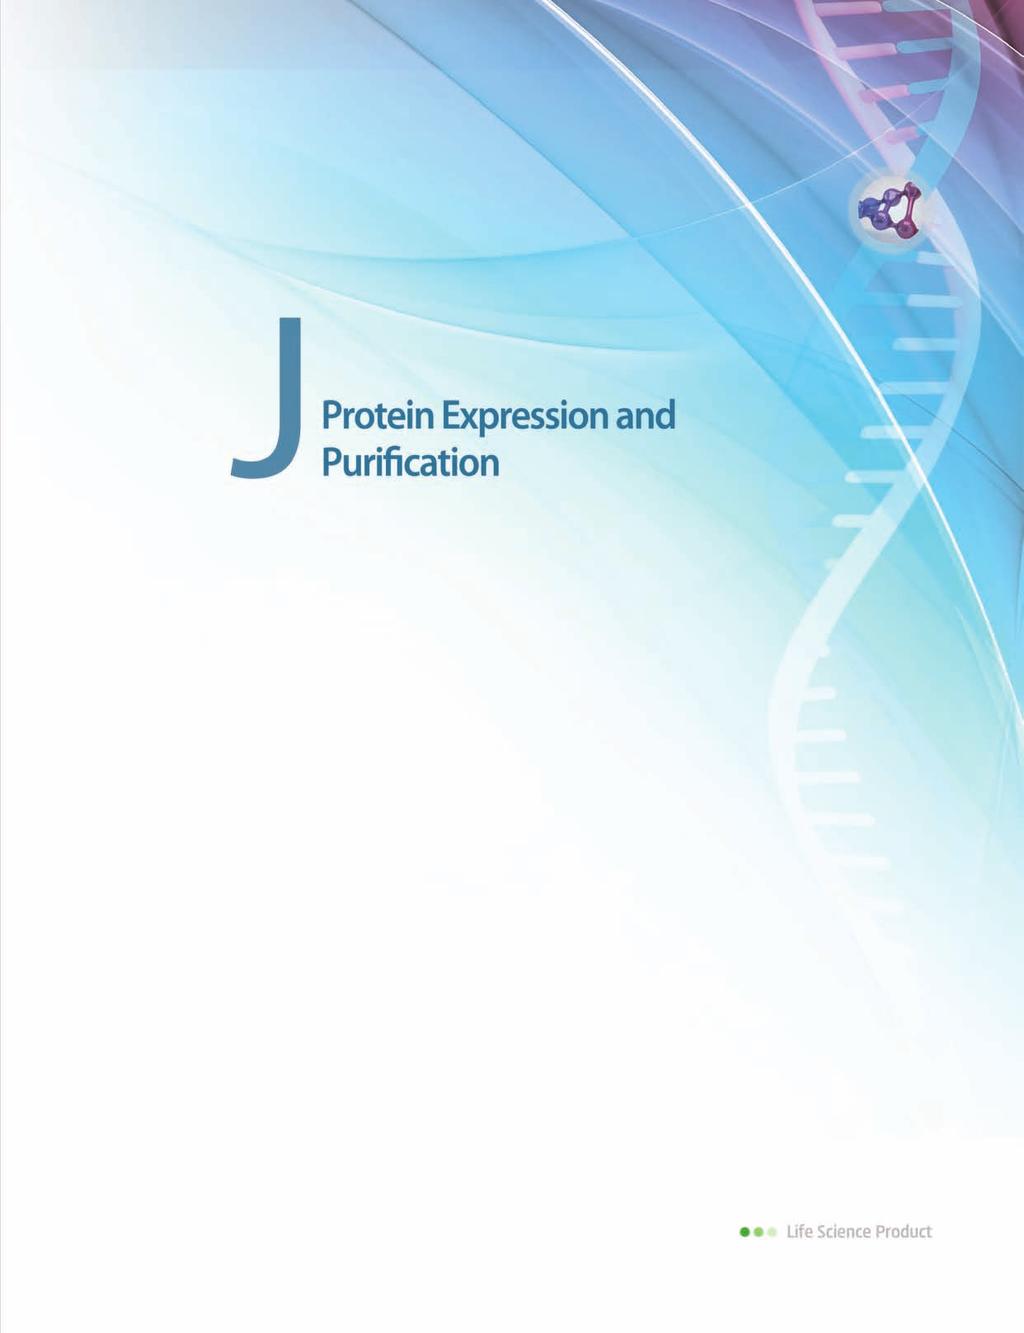 Automated Protein Expression and Purification: ExiProgen TM Manual Protein Expression and Purification: AccuRapid TM & MagListo TM Preparation of Template DNA for Protein Expression Protein Service